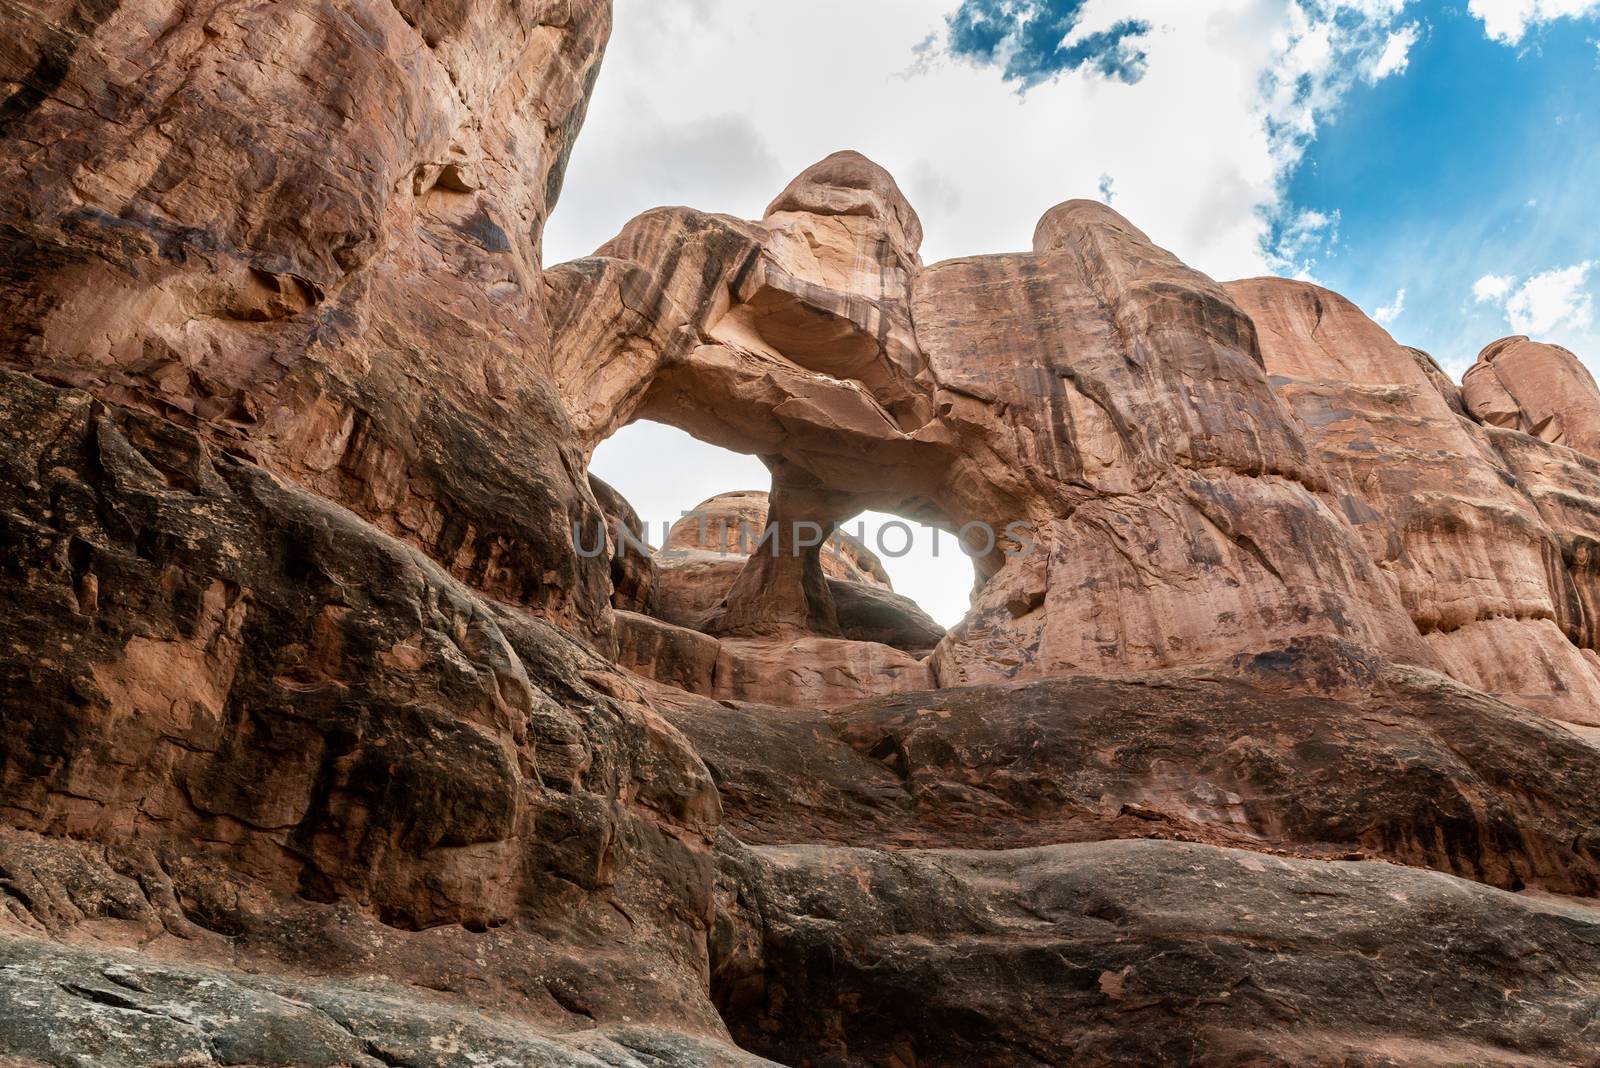 Skull Arch in Fiery Furnace in Arches National Park, Utah by Njean